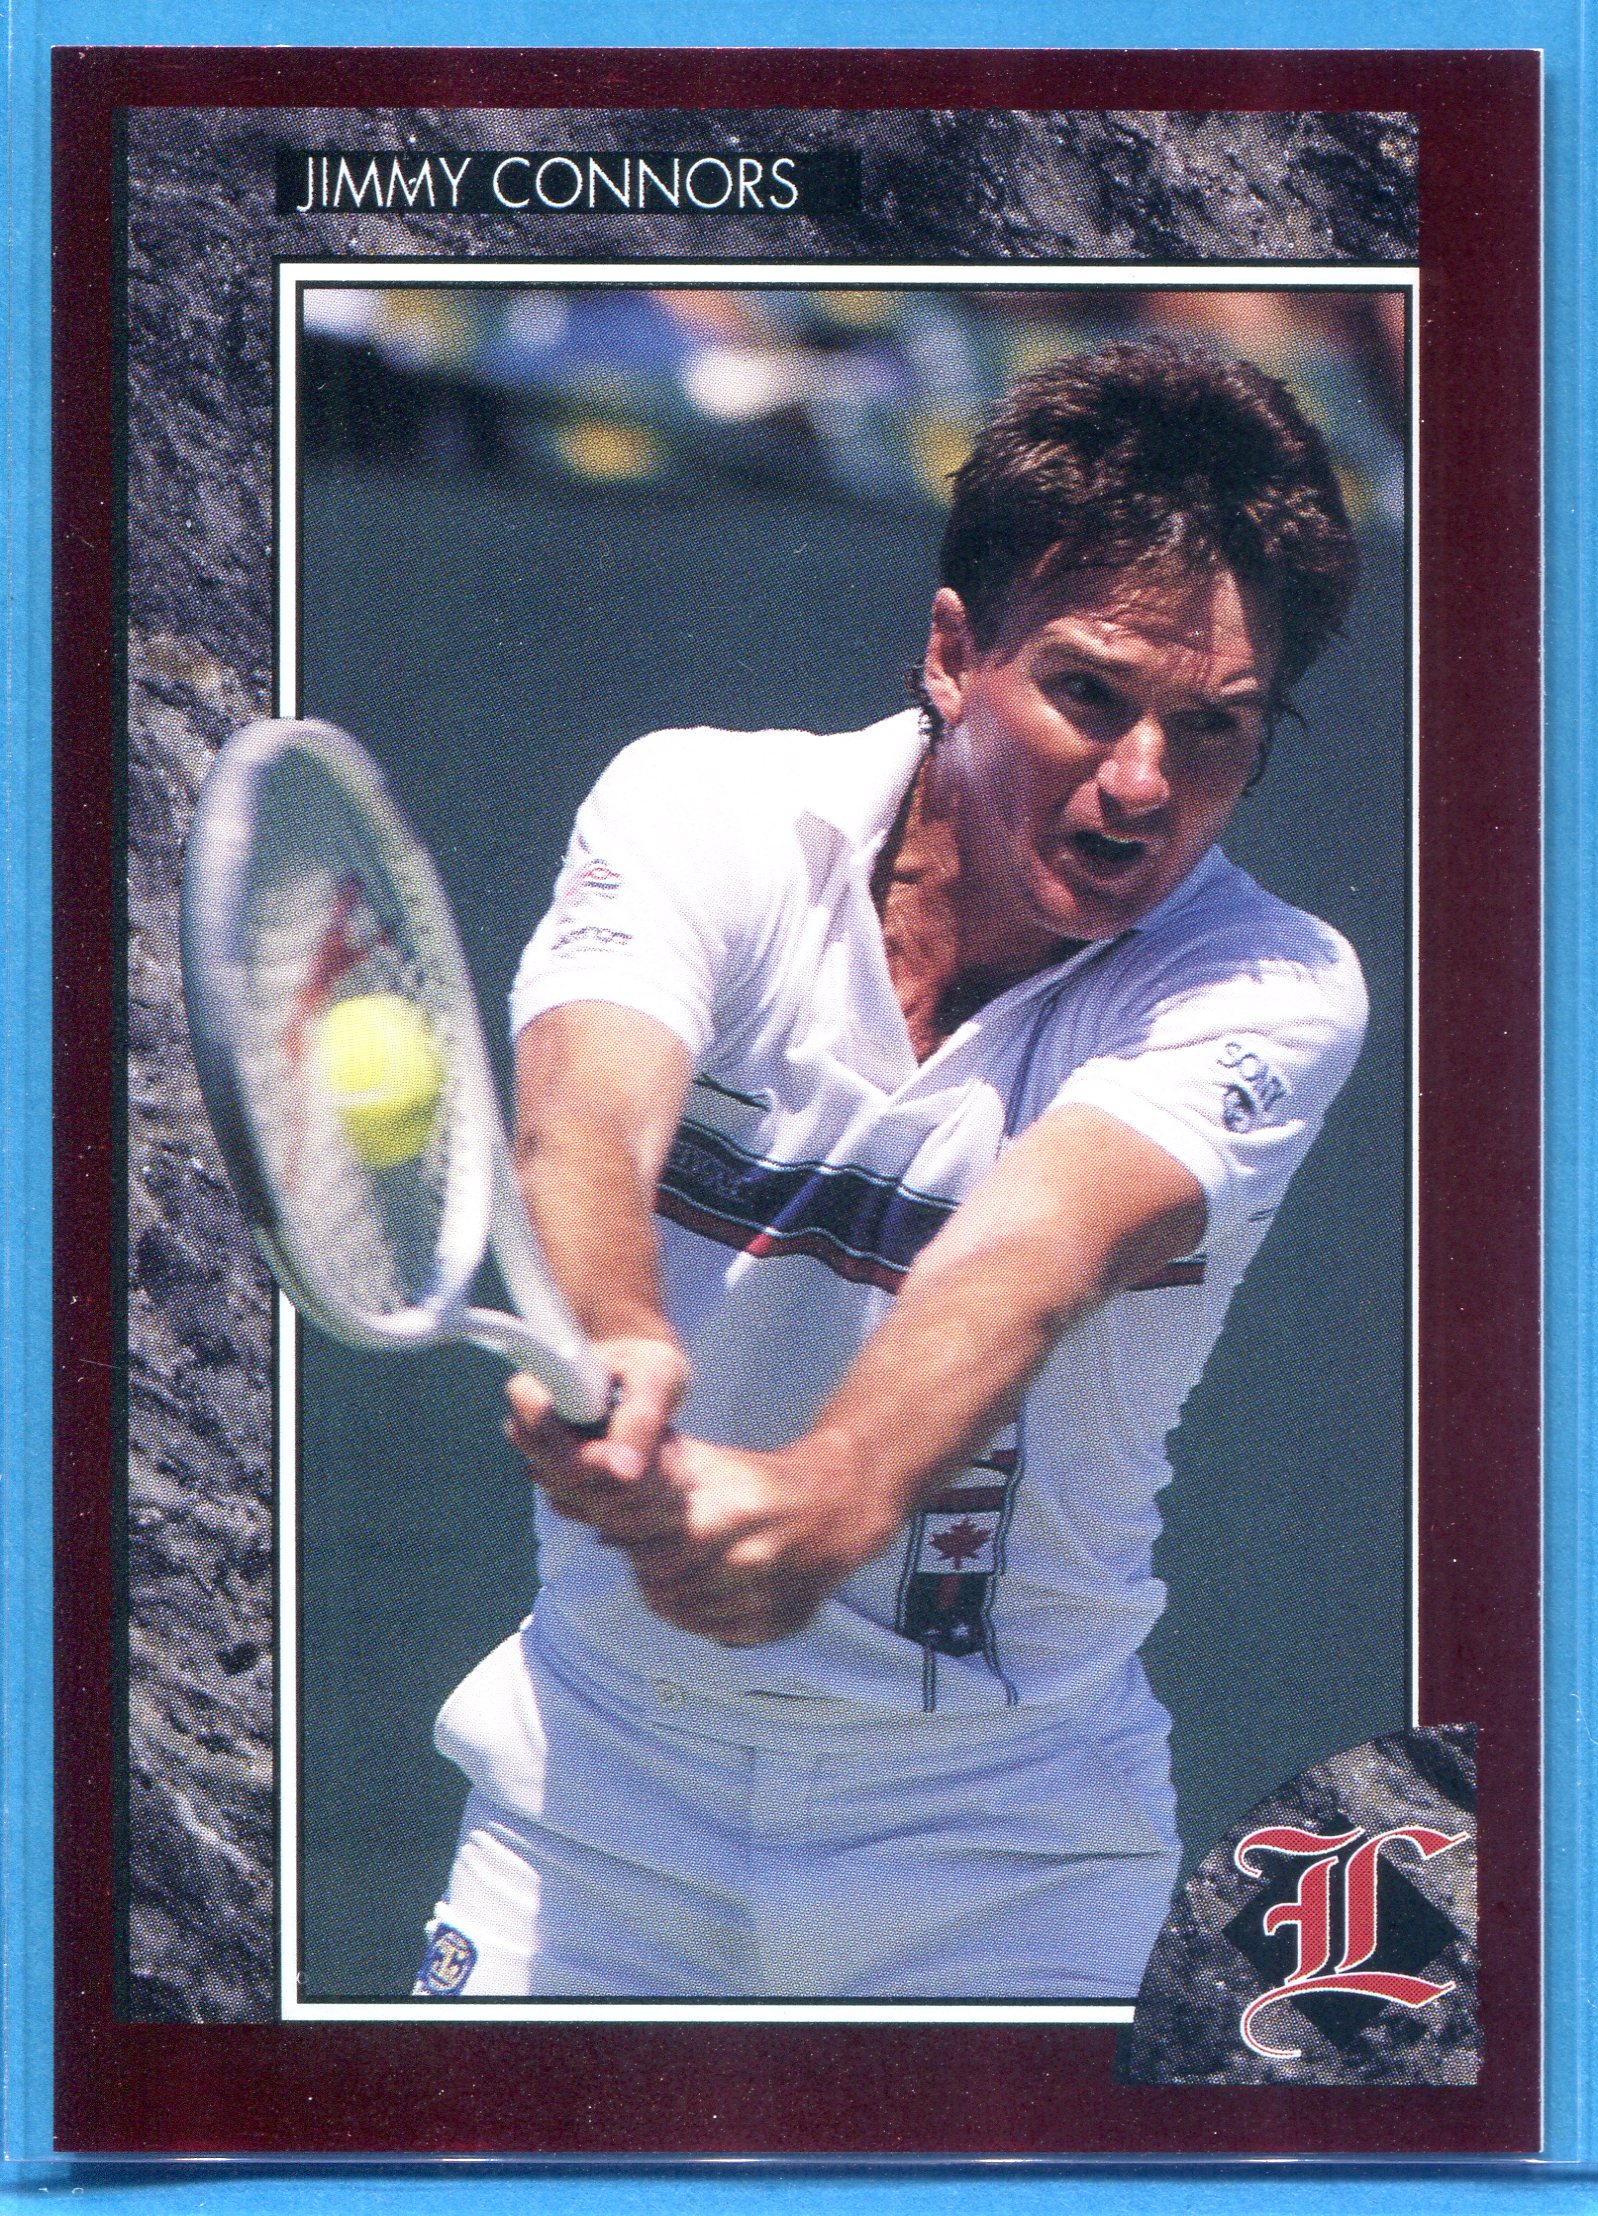 1992 Legends Red Foil Tennis Card #7 Jimmy Connors